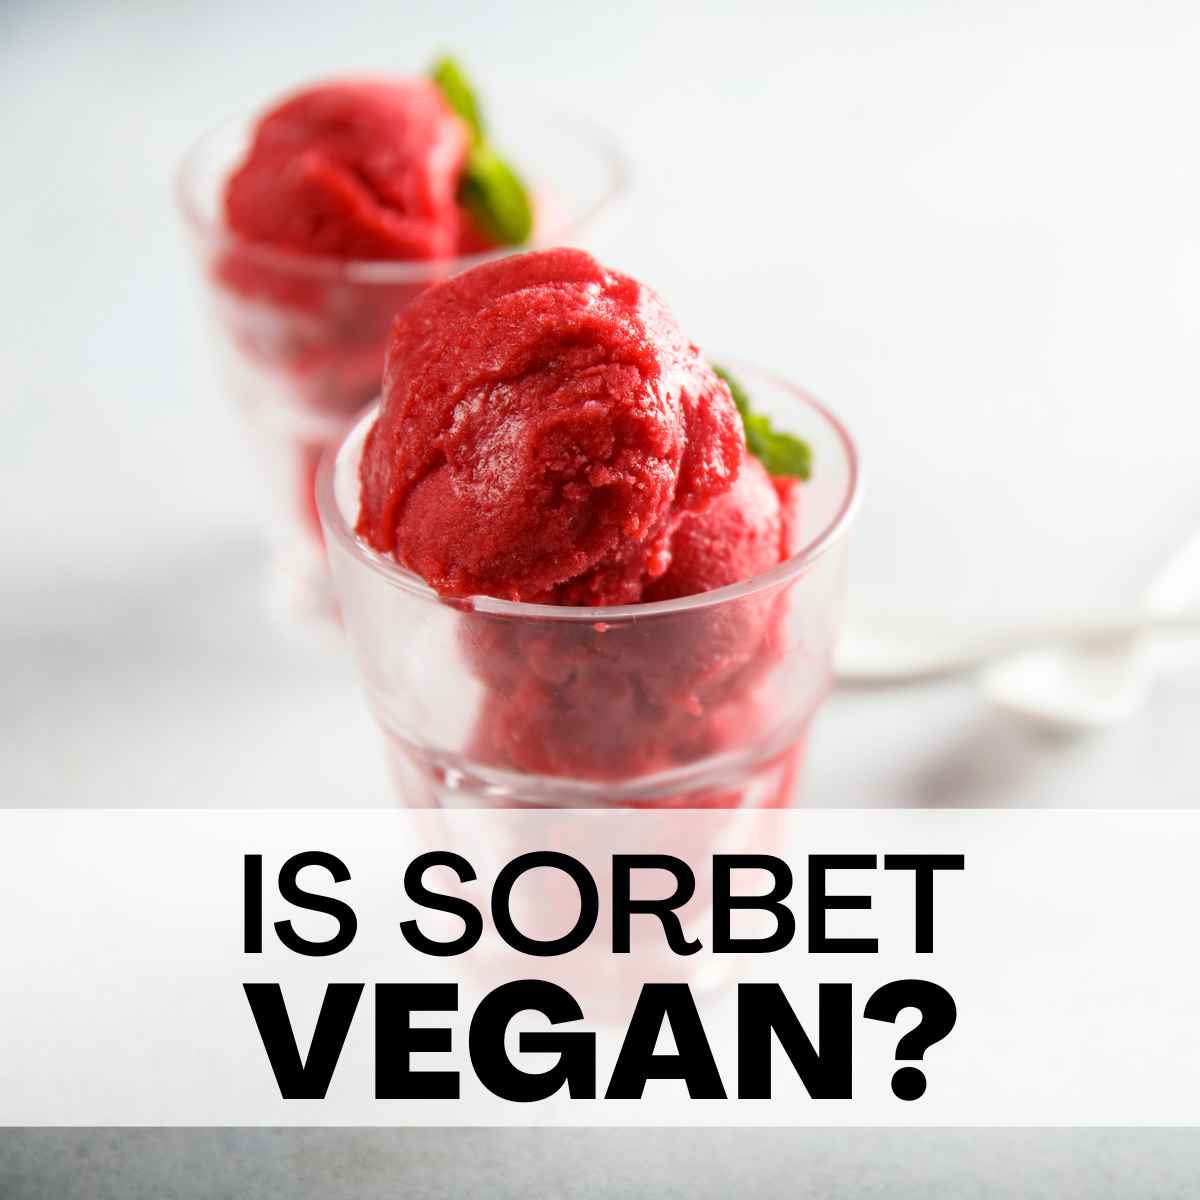 Banner saying is sorbet vegan? and red color sorbet served in a glass bowl in background.